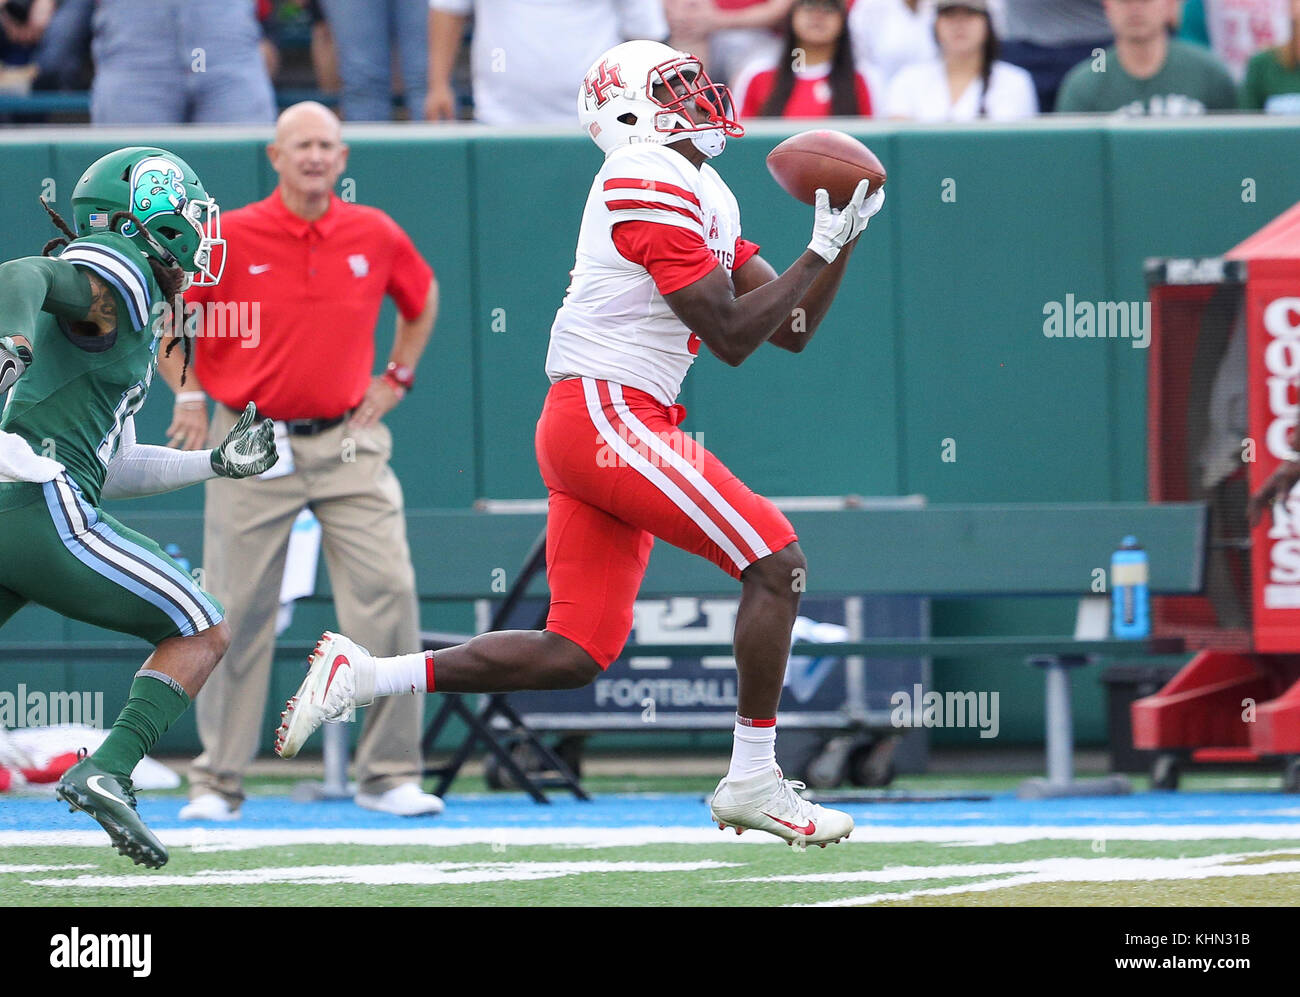 New Orleans, LA, USA. 18th Nov, 2017. A long pass falls into the hands of Houston's Courtney Lark #9 during the NCAA football game between the Tulane Green Wave and the Houston Cougars at Yulman Stadium in New Orleans, LA. Kyle Okita/CSM/Alamy Live News Stock Photo